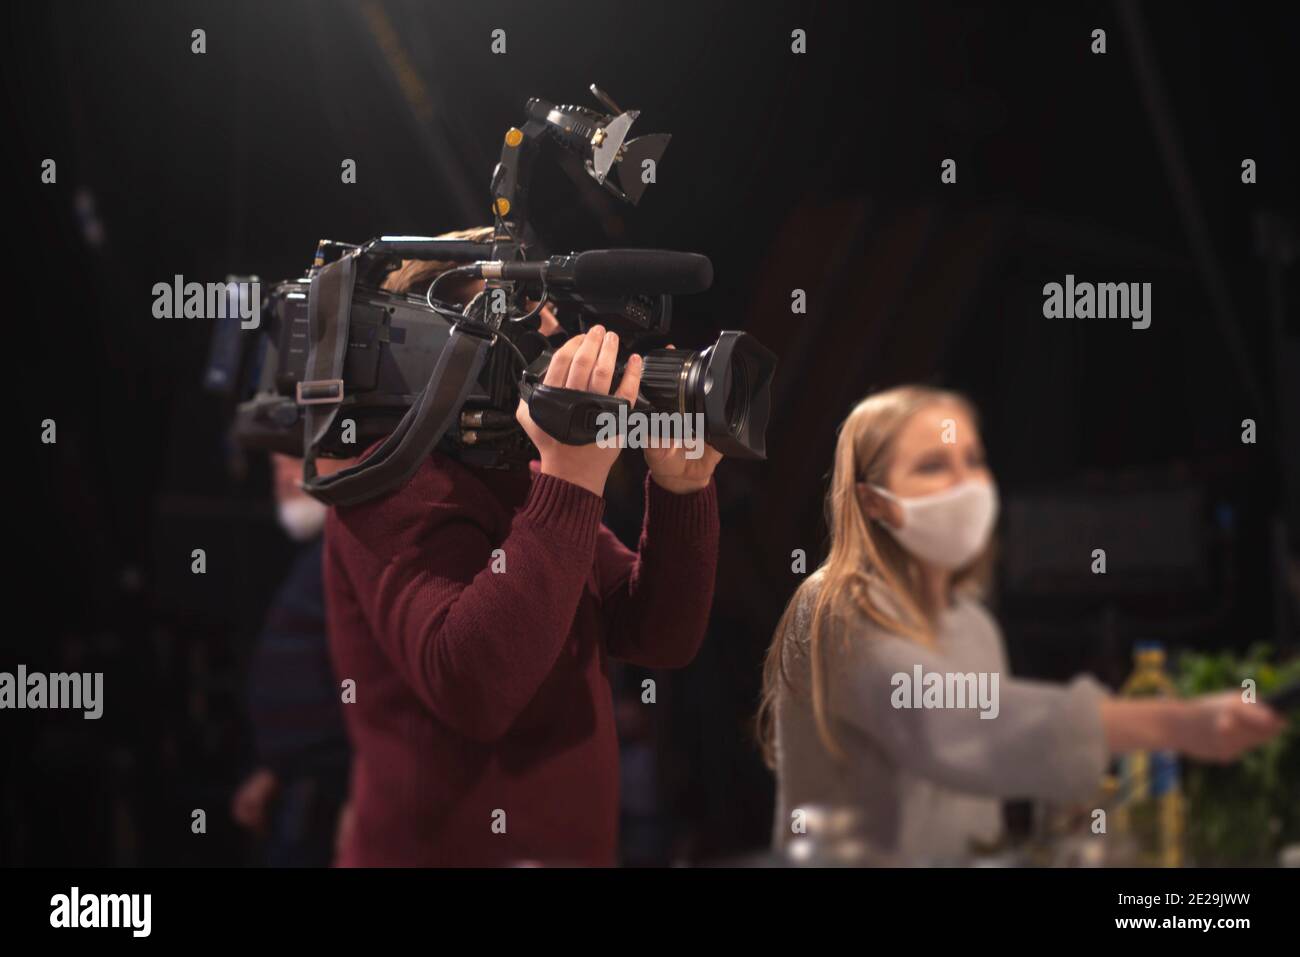 masked journalists interviewing during a pandemic. Covid-19 Stock Photo